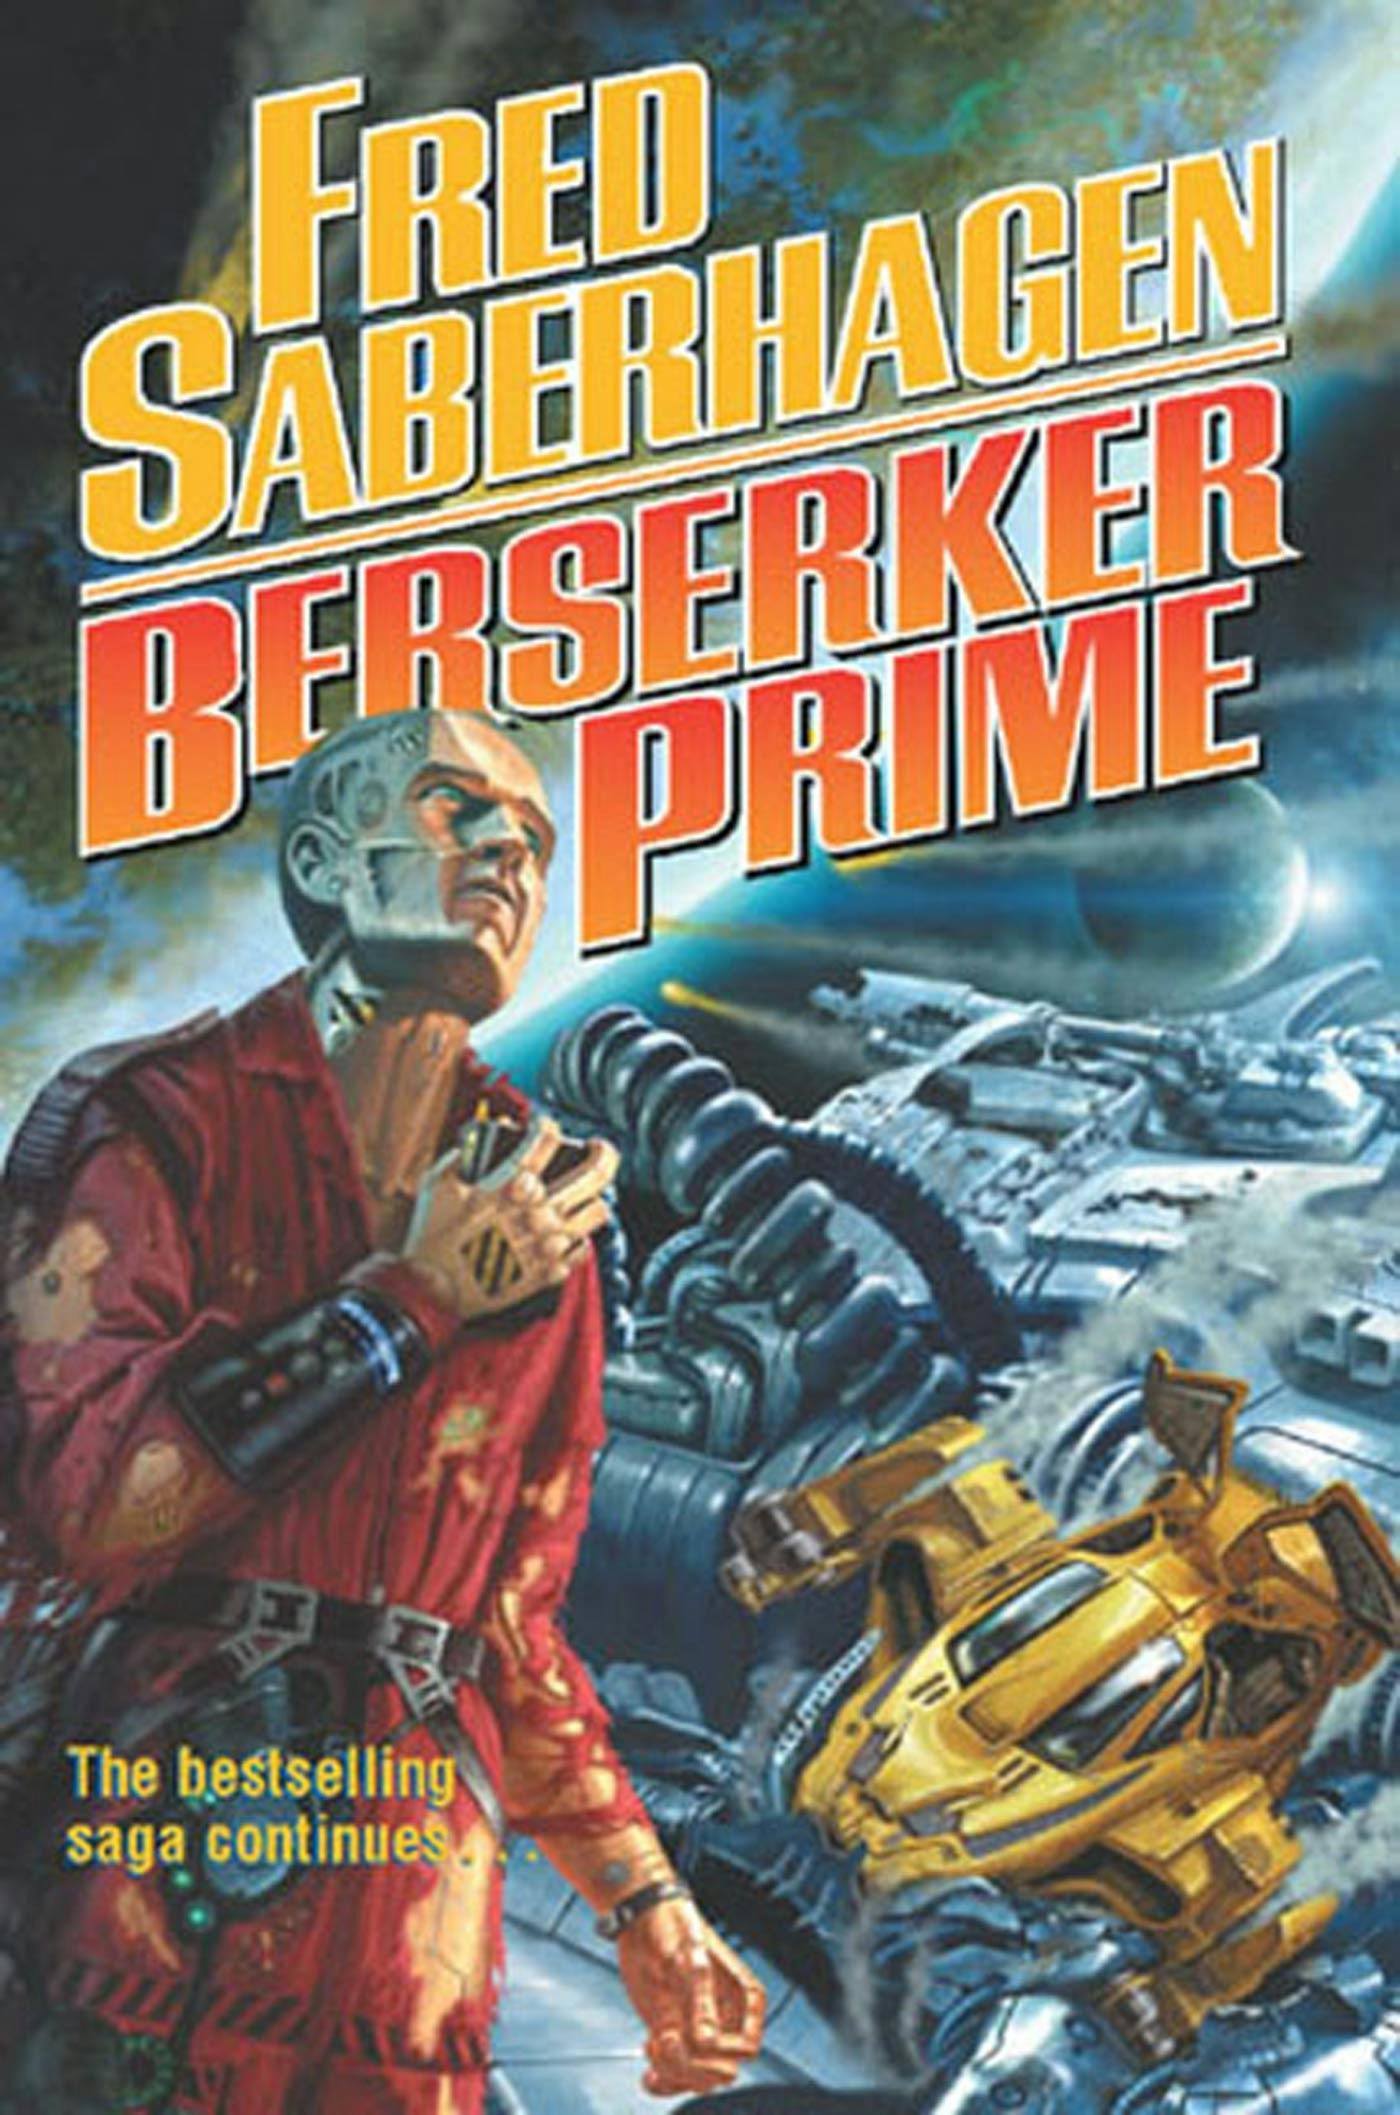 Cover for the book titled as: Berserker Prime